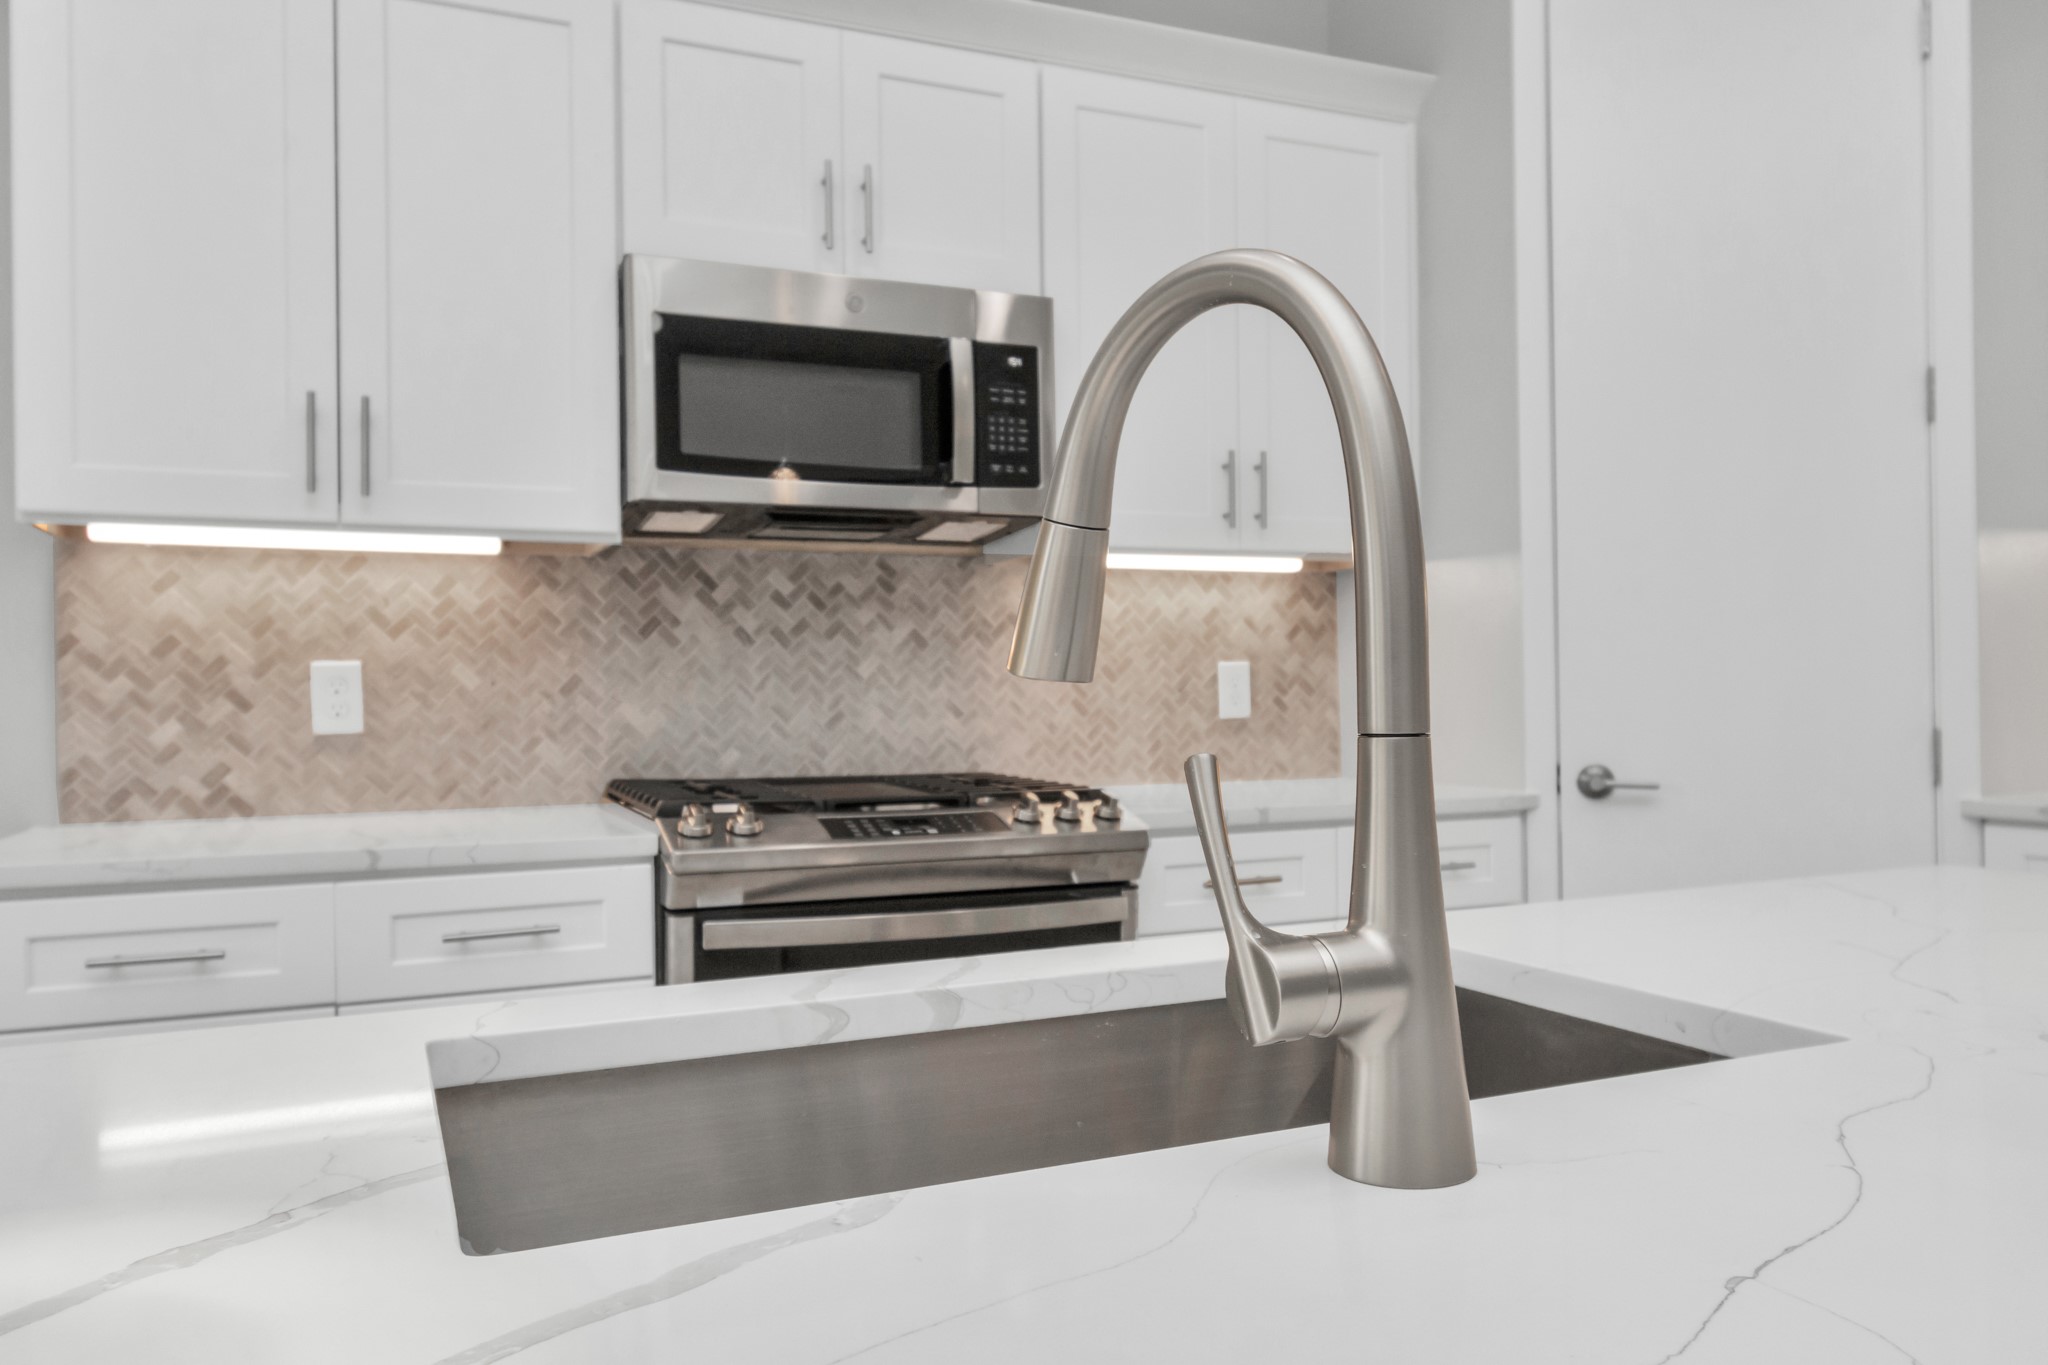 Brushed Nickel faucets blend perfectly with the Stainless Steel Appliances